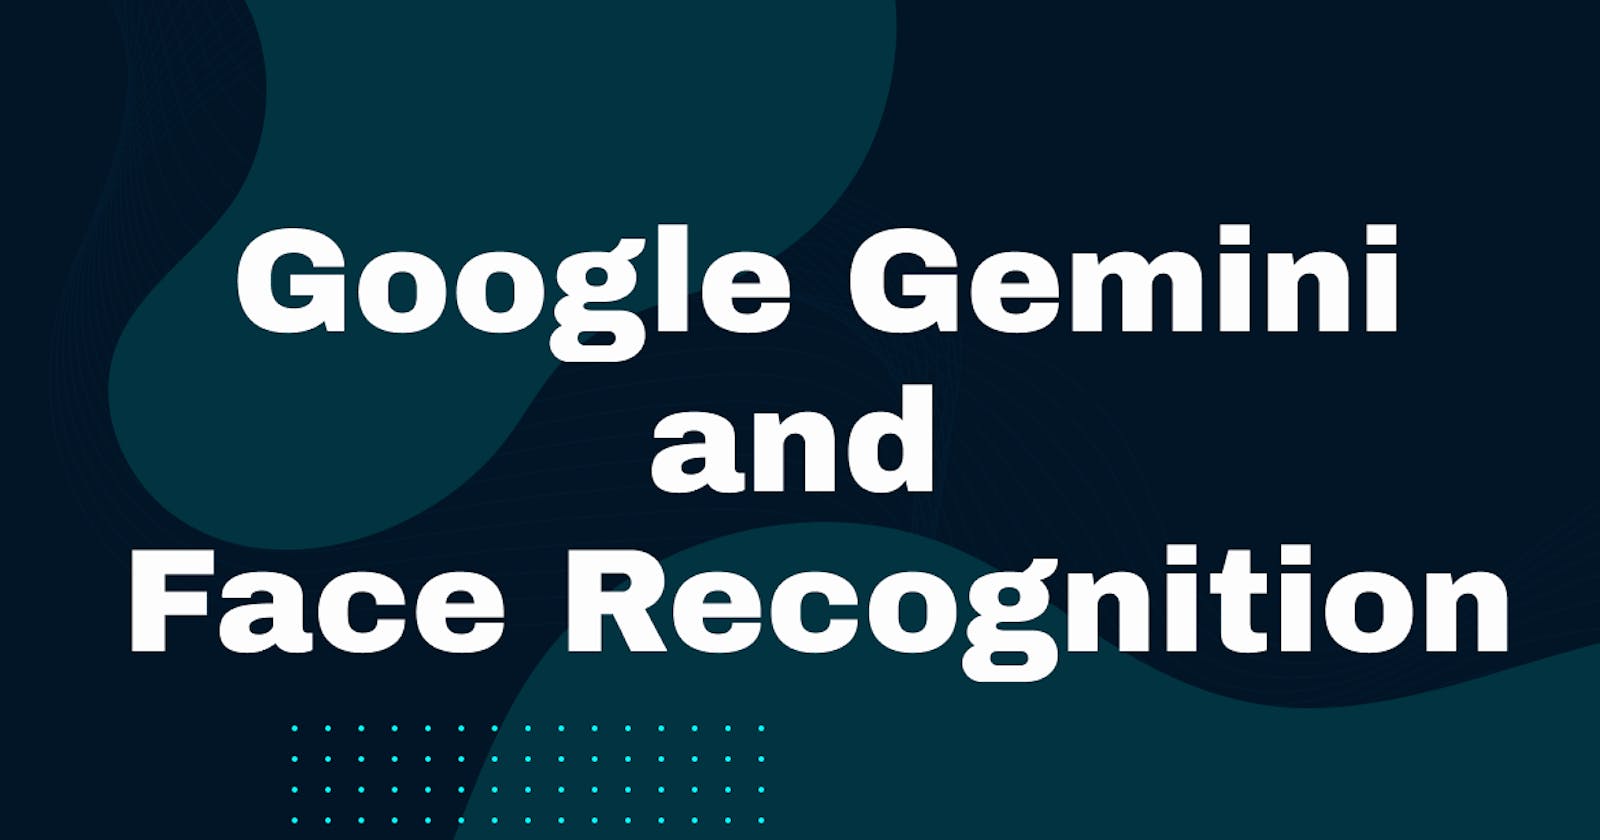 Google Gemini and Face Recognition